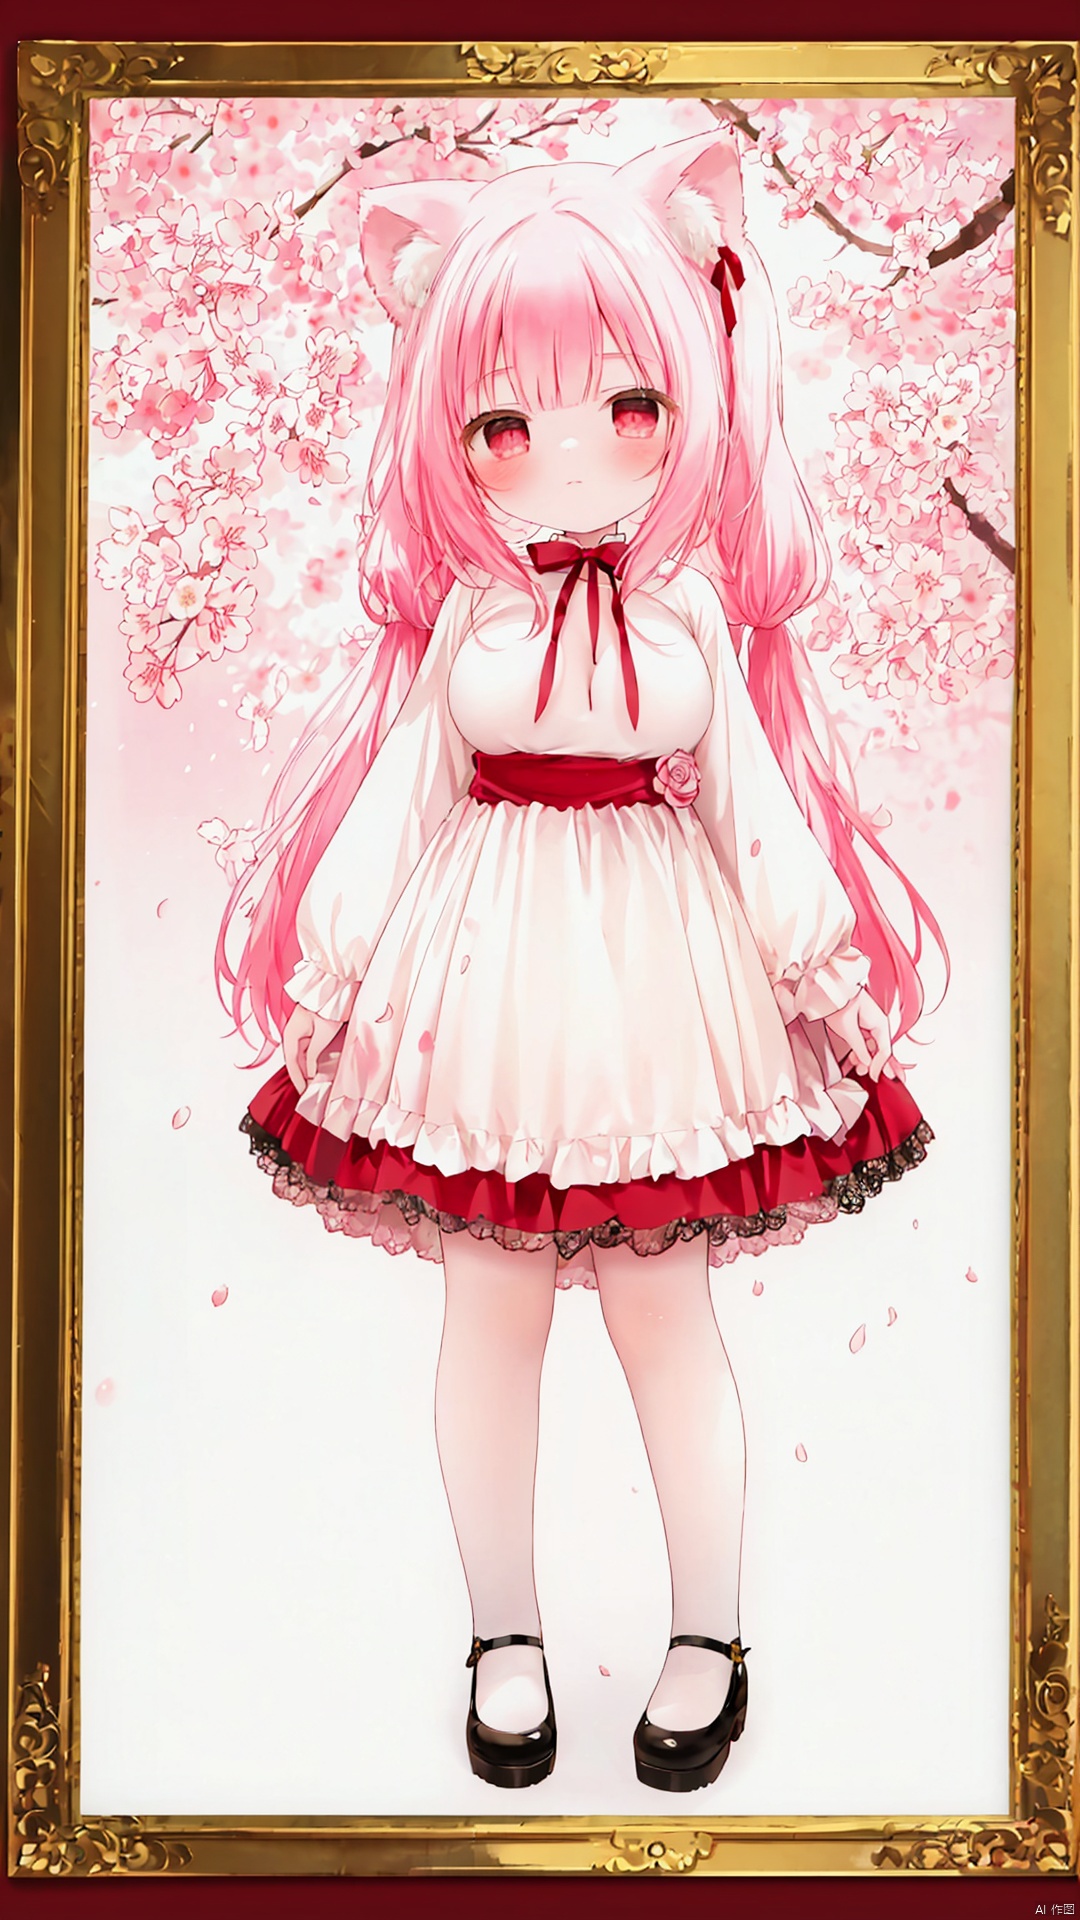  standing amidst a flurry of red cherry blossoms. The contrast between her white dress and the red flowers creates a striking visual effect. The lighting in the image is well-balanced, casting a warm glow on the girl and the surrounding flowers. The colors are vibrant and vivid, with the red cherry blossoms standing out against the white sky. The overall style of the image is dreamy and romantic, perfect for a piece of anime artwork. The quality of the image is excellent, with clear details and sharp focus. The girl's dress and the flowers are well-defined, and the background is evenly lit, without any harsh shadows or glare. From a technical standpoint, the image is well-composed, with the girl standing in the center of the frame, surrounded by the blossoms. The use of negative space in the background helps to draw the viewer's attention to the girl and the flowers. The cherry blossoms, often associated with transience and beauty, further reinforce this theme. The girl, lost in her thoughts, seems to be contemplating the fleeting nature of beauty and the passage of time. Overall, this is an impressive image that showcases the photographer's skill in capturing the essence of a scene, as well as their ability to create a compelling narrative through their art.,pink hair,cat ears,(loli, child, little girl, 3-years-old:1.3), (huge breasts:1.5), big nipples,cleavage, bare shoulders, off shoulder, Japanese clothes,long hair,full body,full body,372089